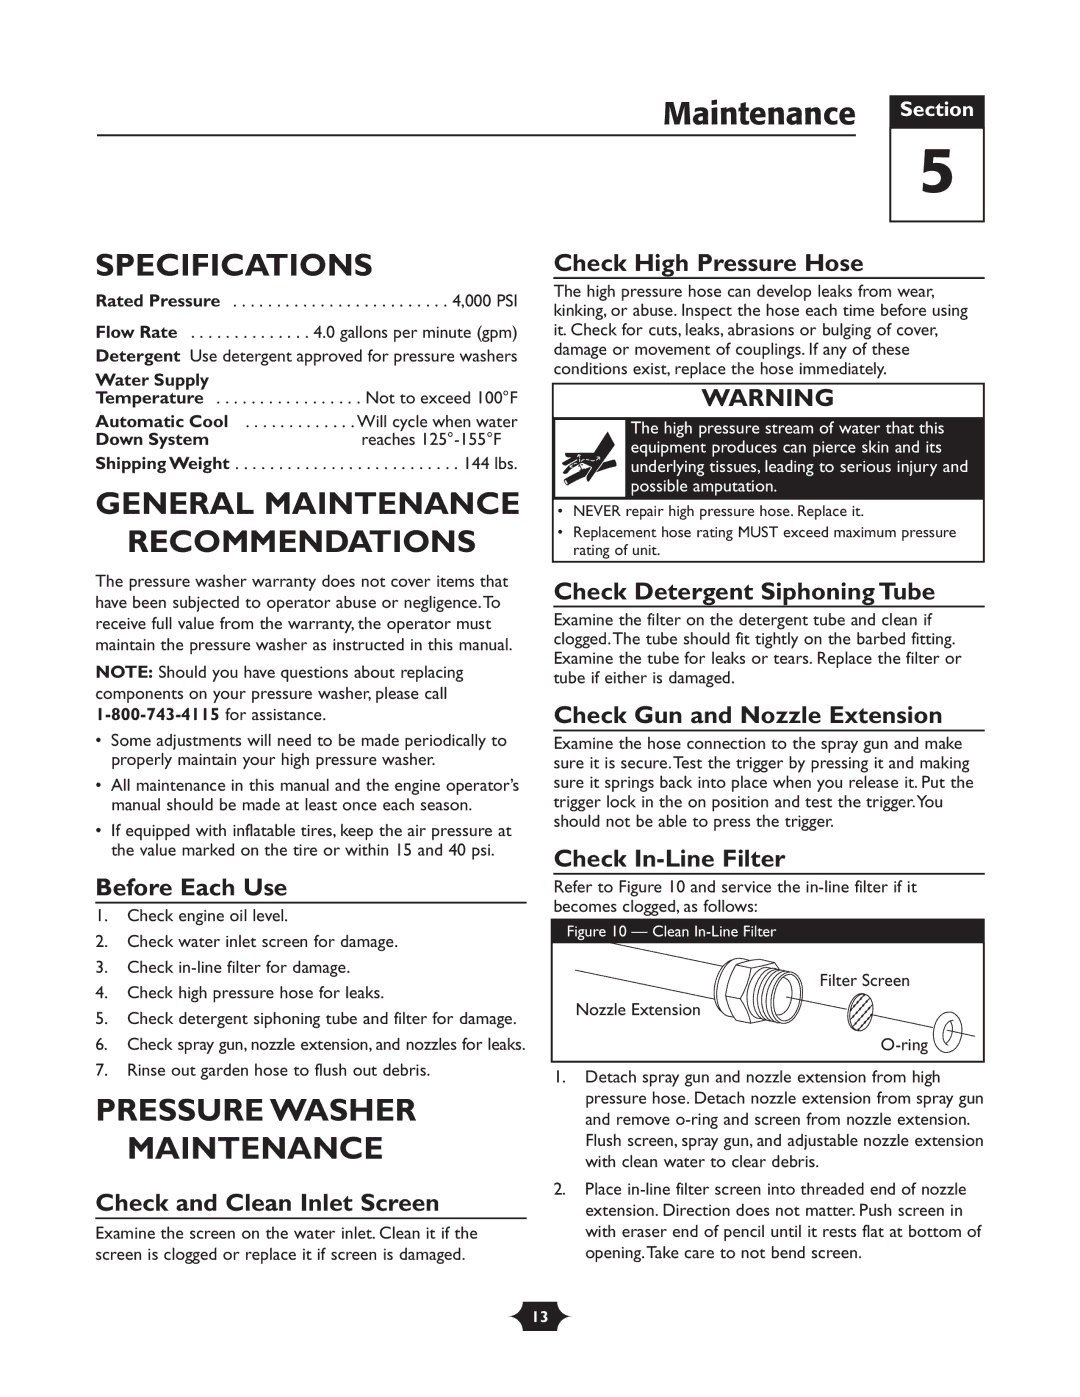 Briggs & Stratton 20258 manual Maintenance Section, Specifications, General Maintenance Recommendations 